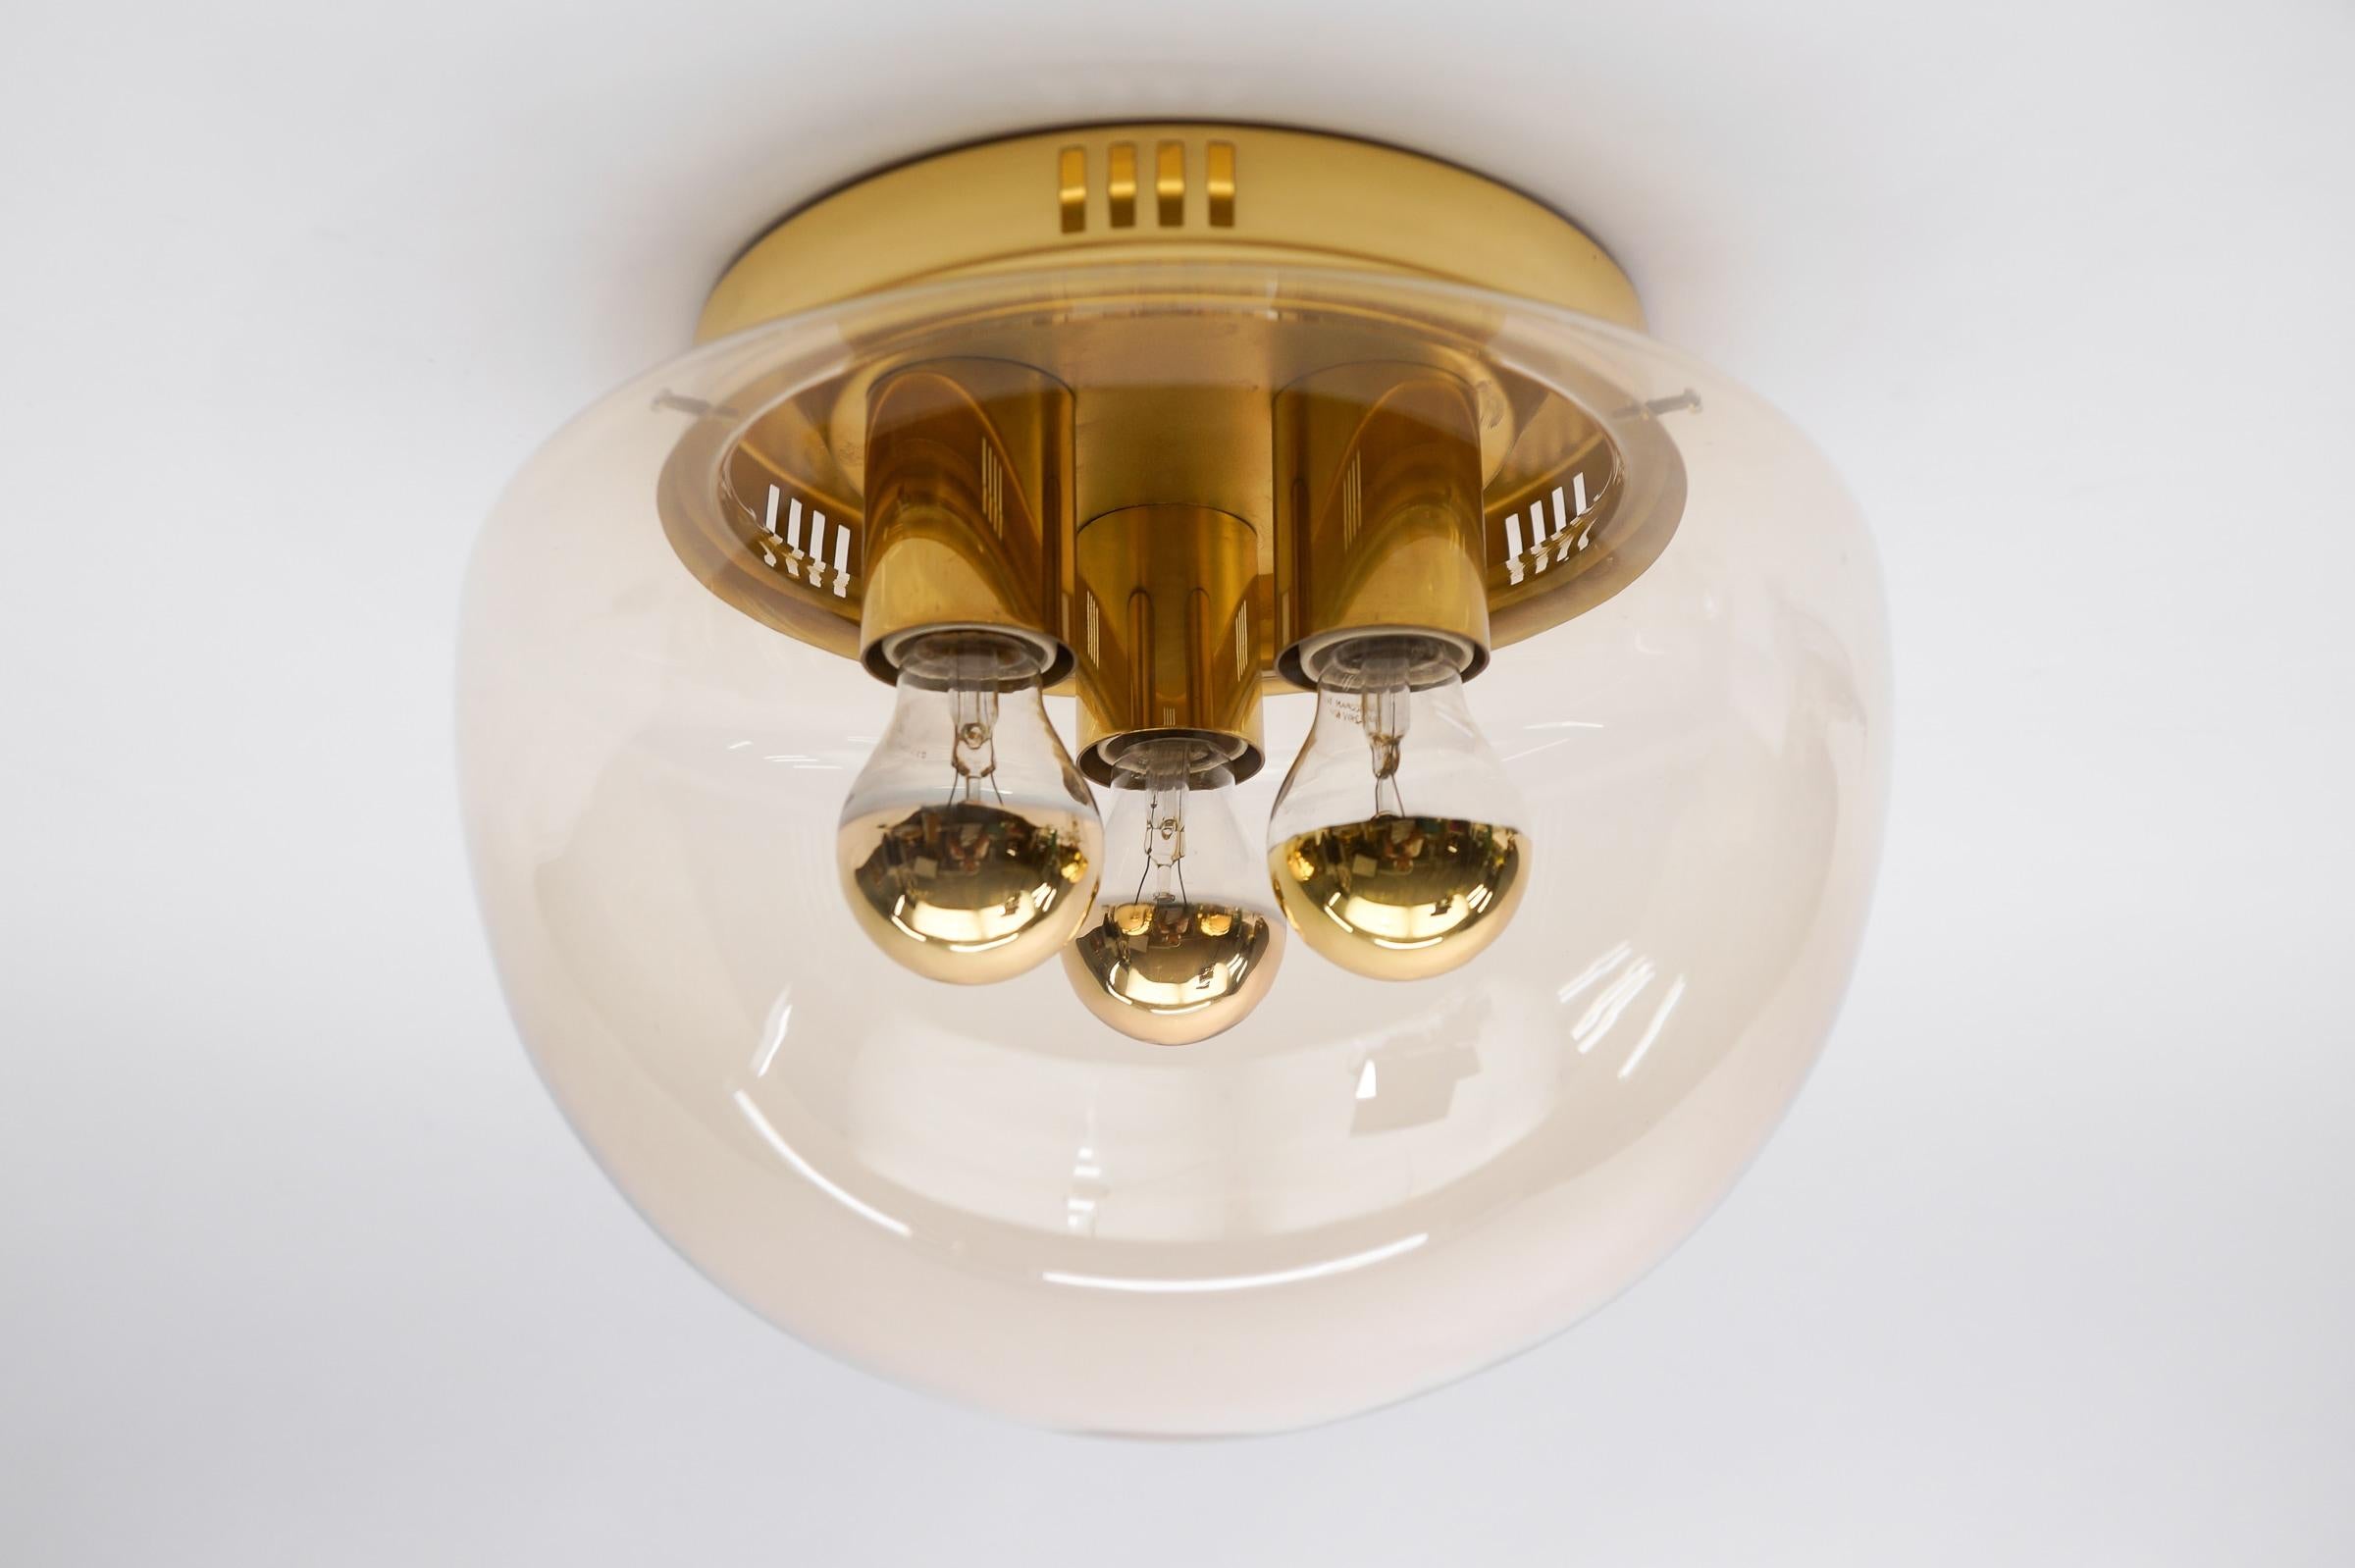 Huge Elegant 3-Light Amber Glass Flush Mount, Germany 1960s

Dimensions
Height: 10.23 in. (26 cm)
Diameter: 12.6 in. (32 cm)

The fixture need 3 x E27 standard bulb with 60W max.

Light bulbs are not included. 
It is possible to install this fixture